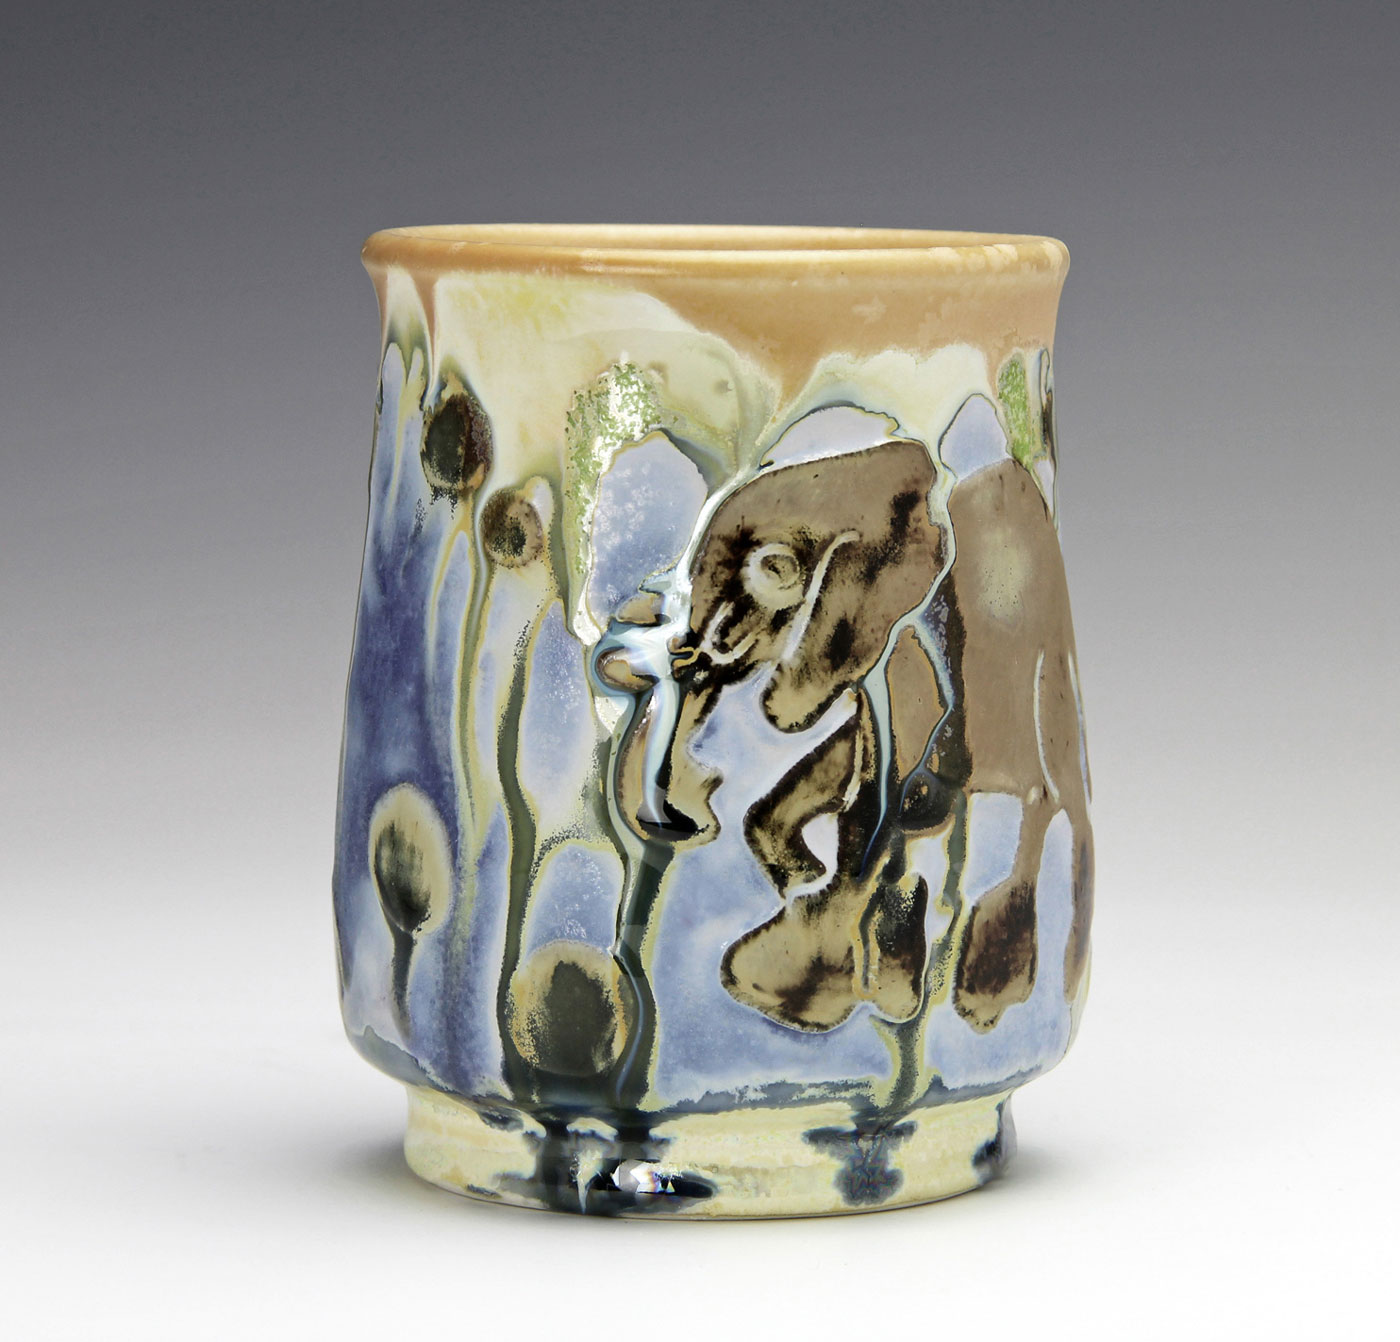 Elephant-on-contemporary-clay-cup-Samantha-Henneke-Seagrove-Pottery.jpg